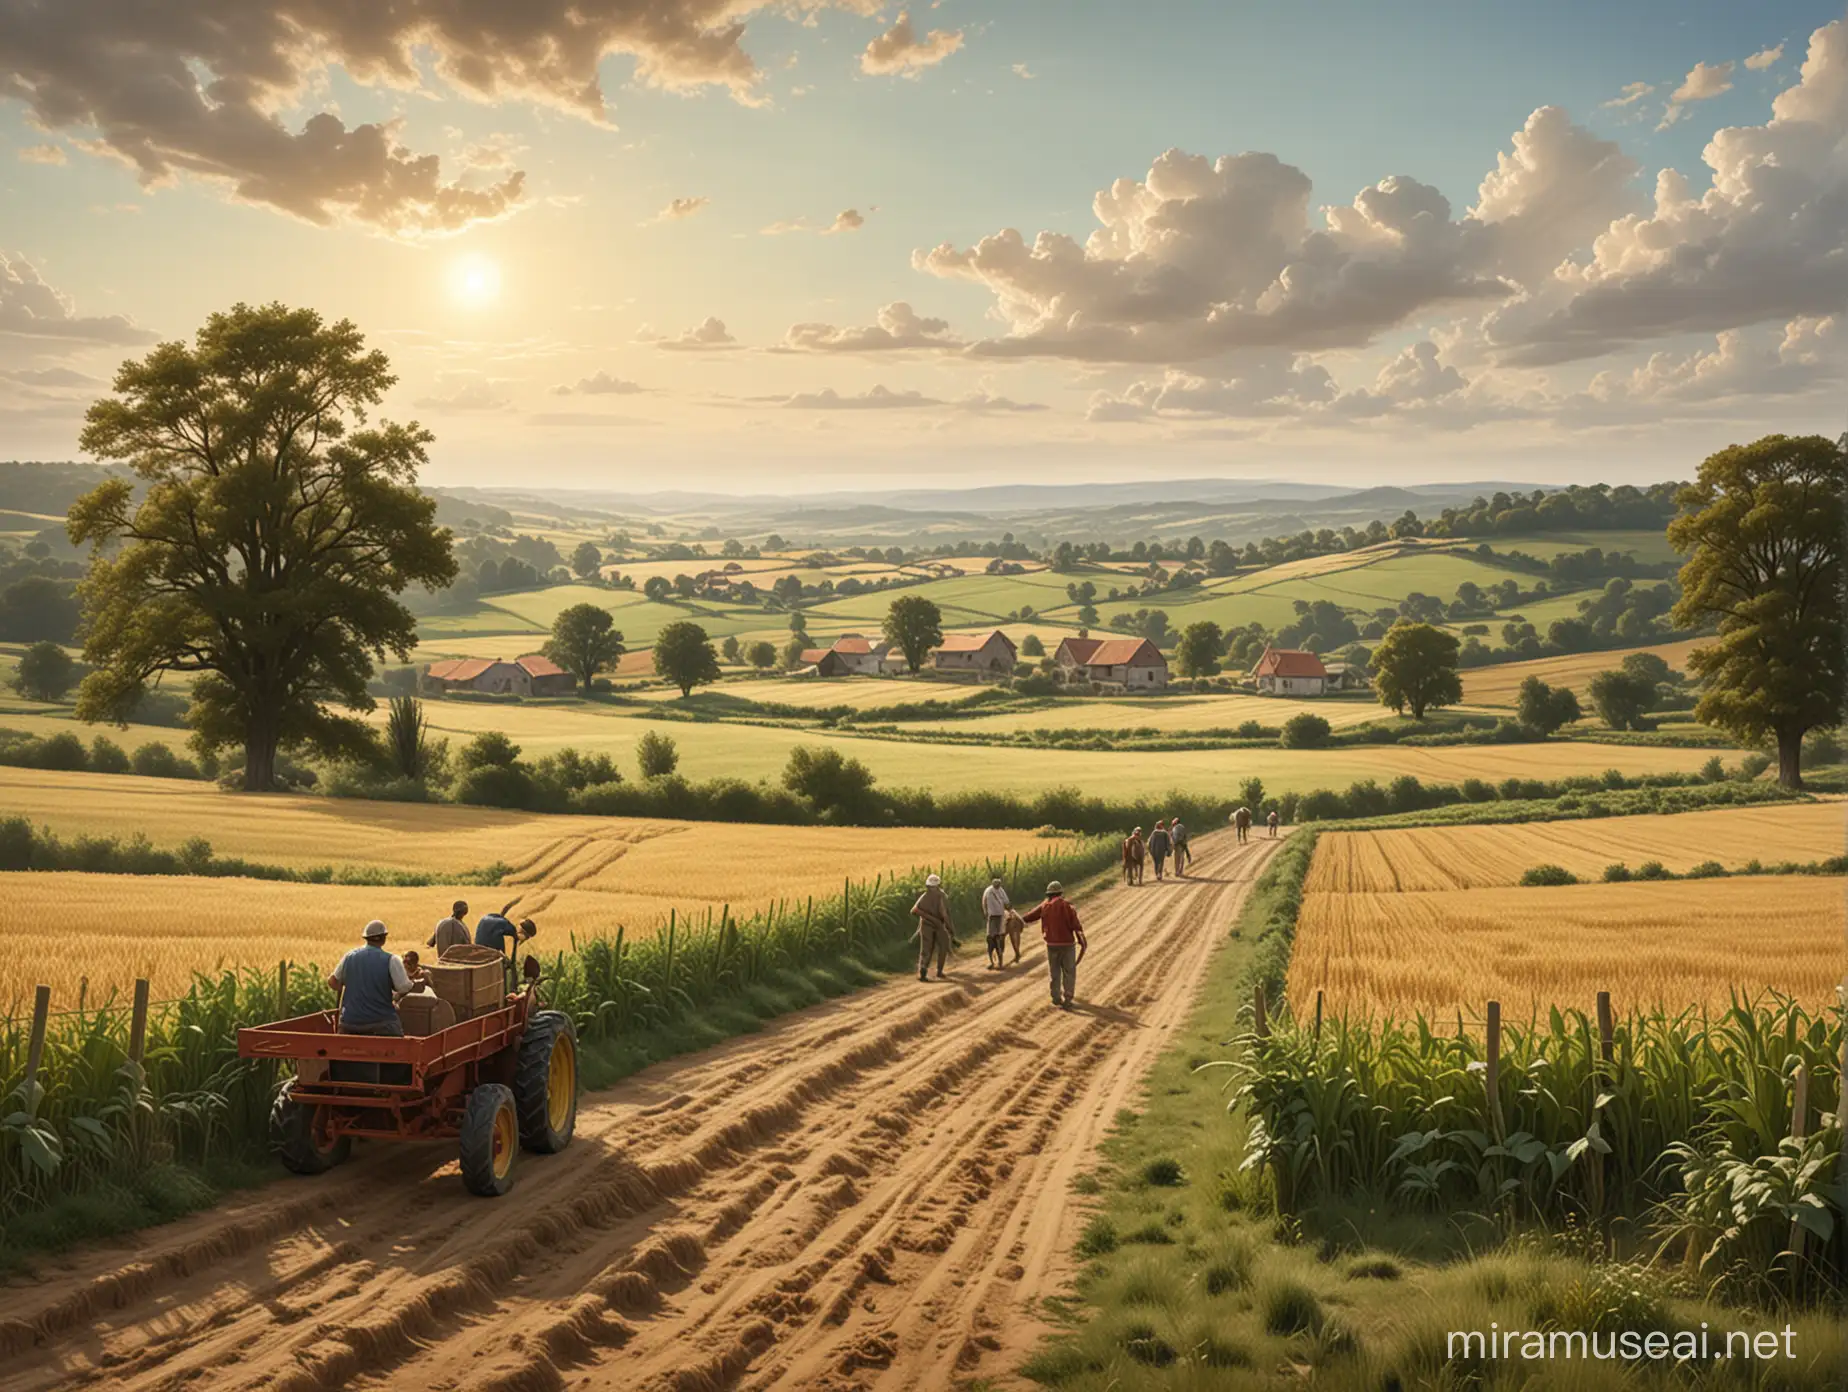 Imagine an illustration showcasing a serene and peaceful countryside landscape,
where farmers are toiling away in the fields, bringing in the harvest.